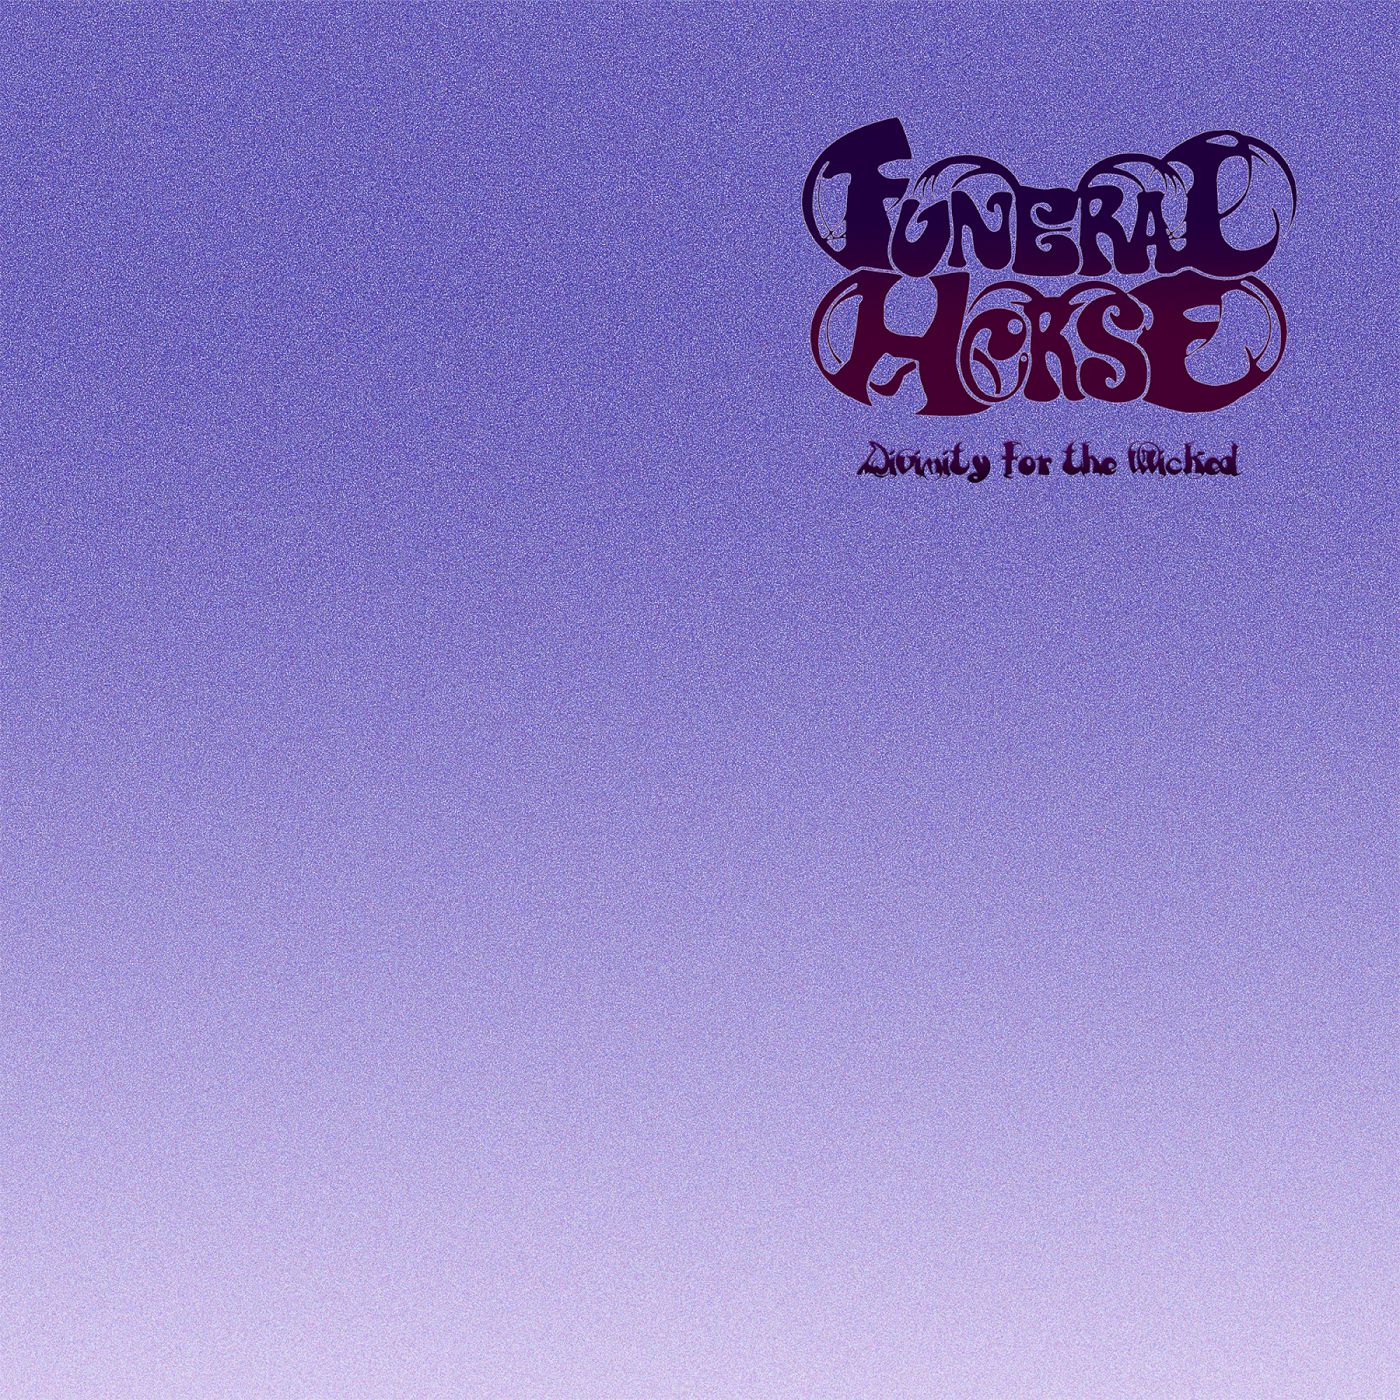 funeral horse divinity for the wicked